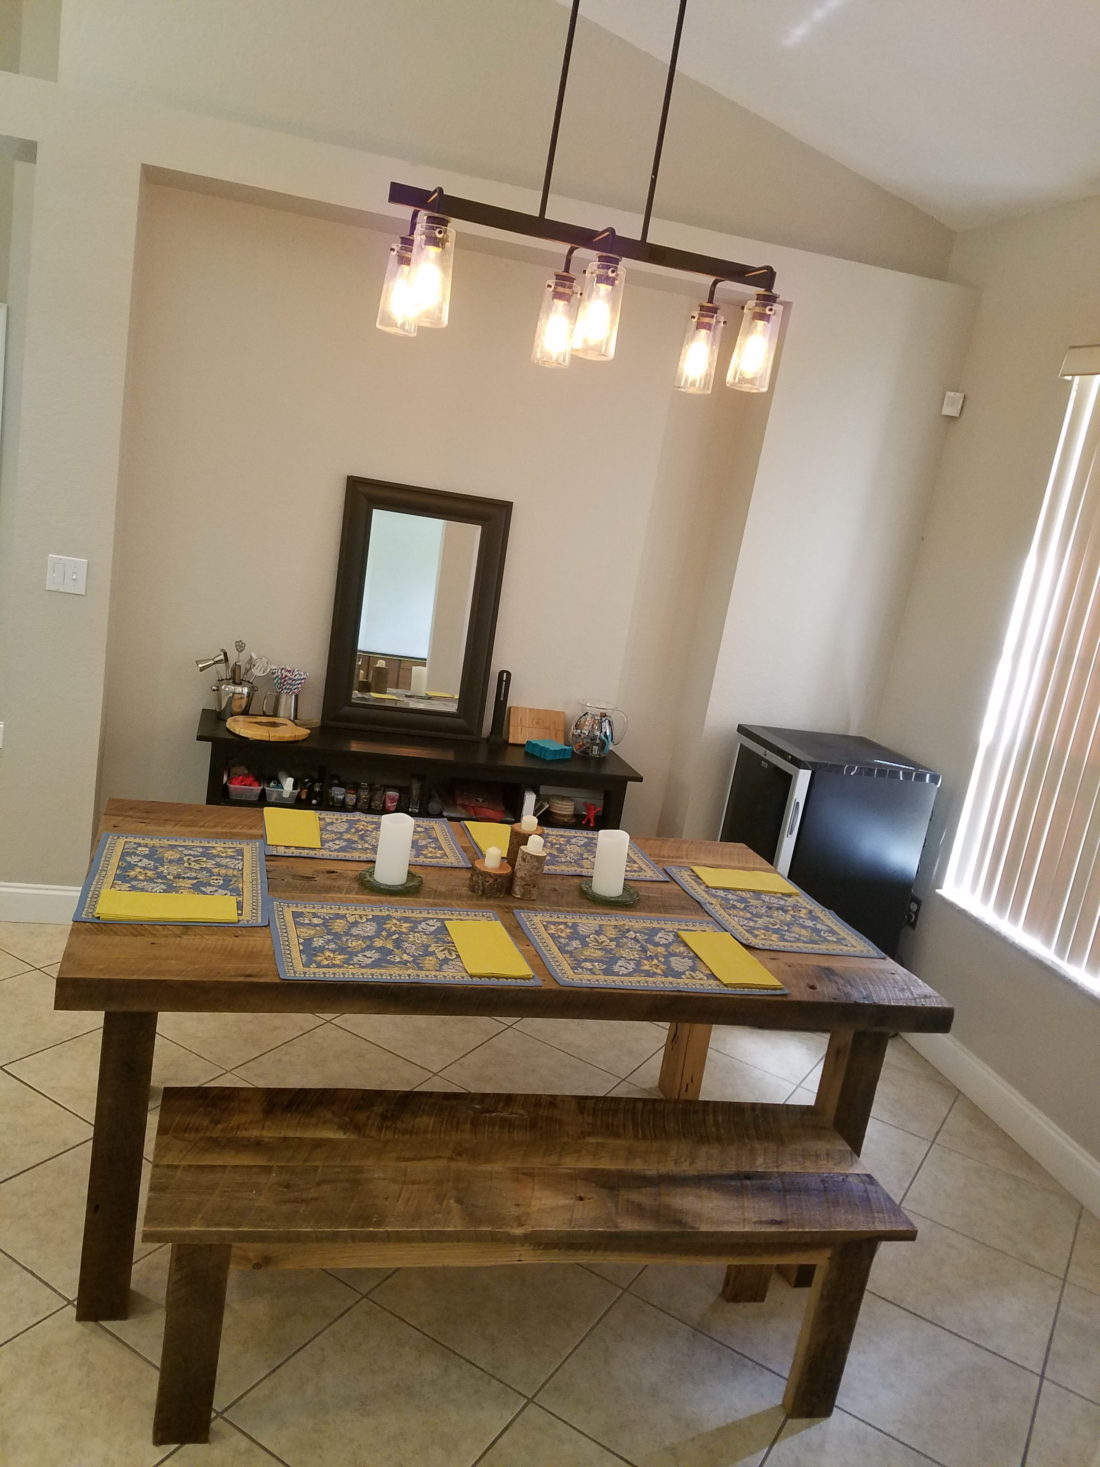 Orlando Reclaimed wood dining table